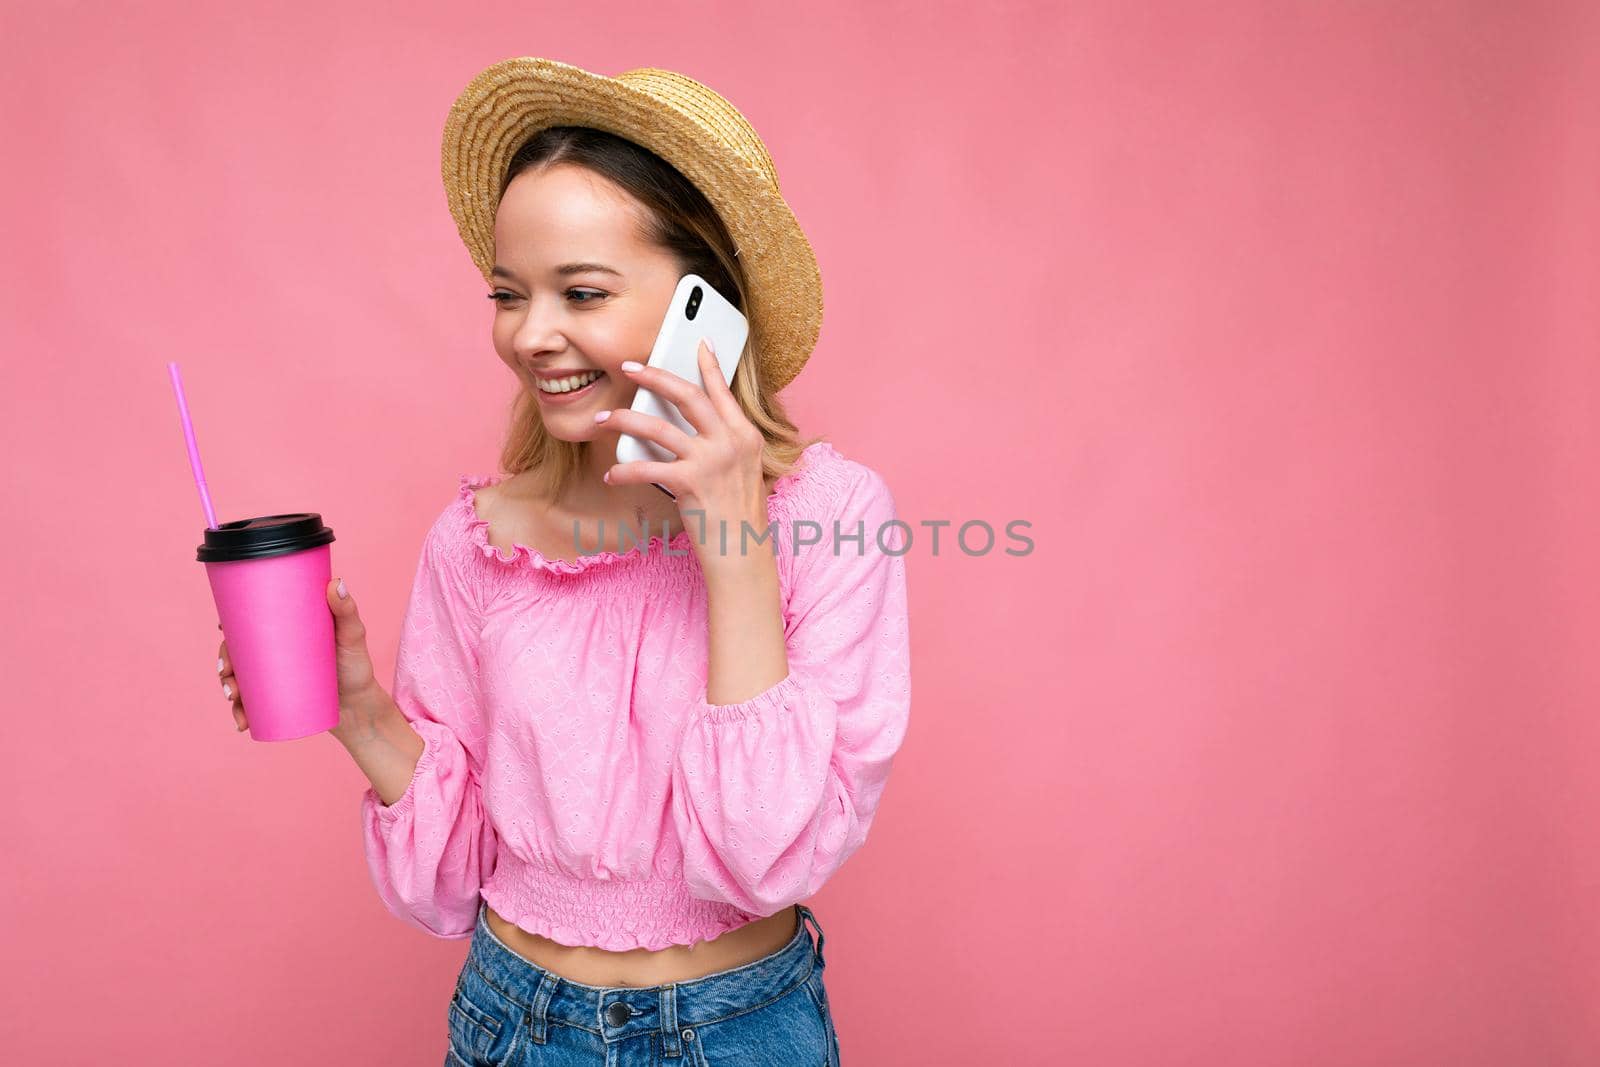 Photo of beautiful positive emotional young blonde woman wearing pink crop blouse and straw hat talking on cellphone while drinking beverage isolated on pink background with copy space.